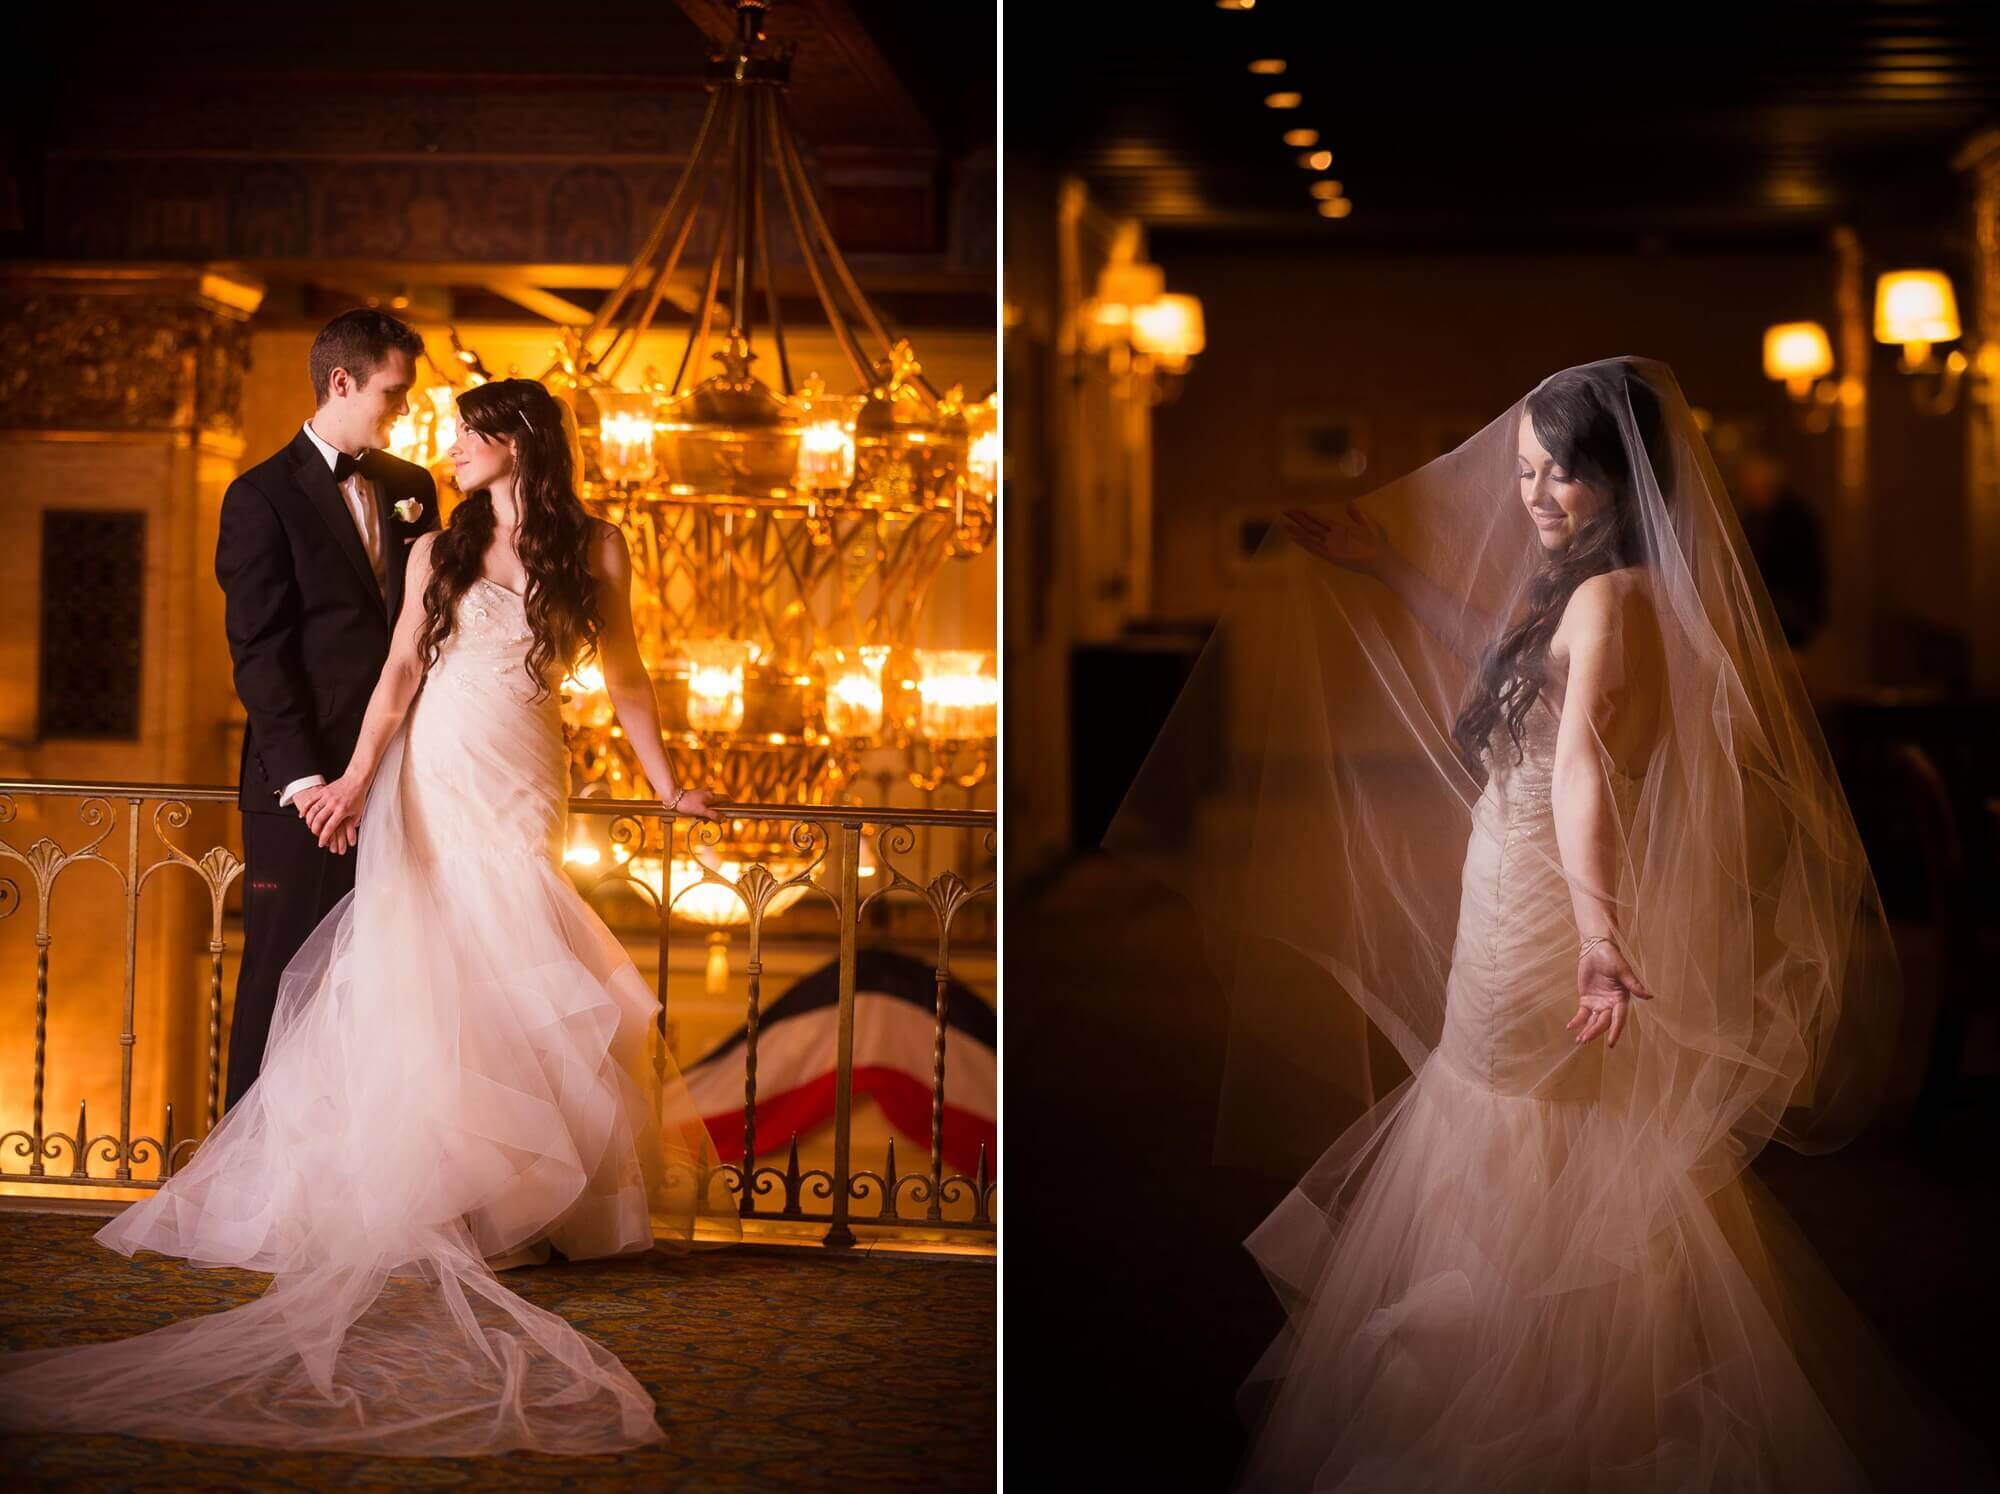 Portrait of the bride underneath her veil surrounded by beautiful lights at the Fairmont Royal York in Toronto